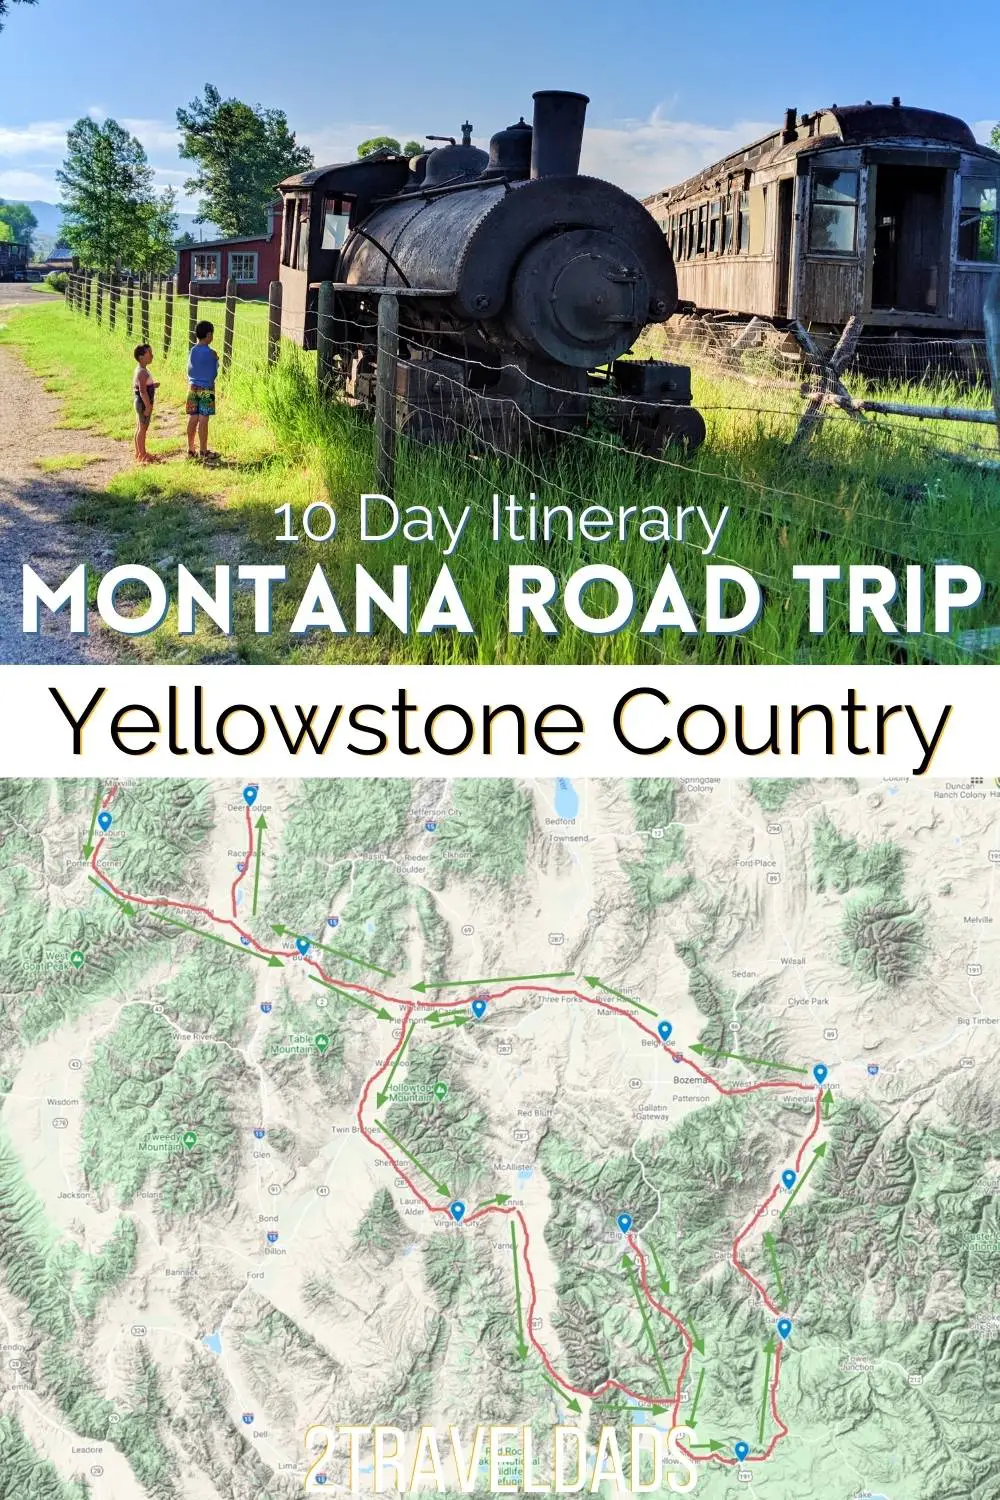 Montana road trip itinerary for 5 or 10 days of western towns and Yellowstone country. This adventure road trip includes national parks, antique stops, and Montana attractions.